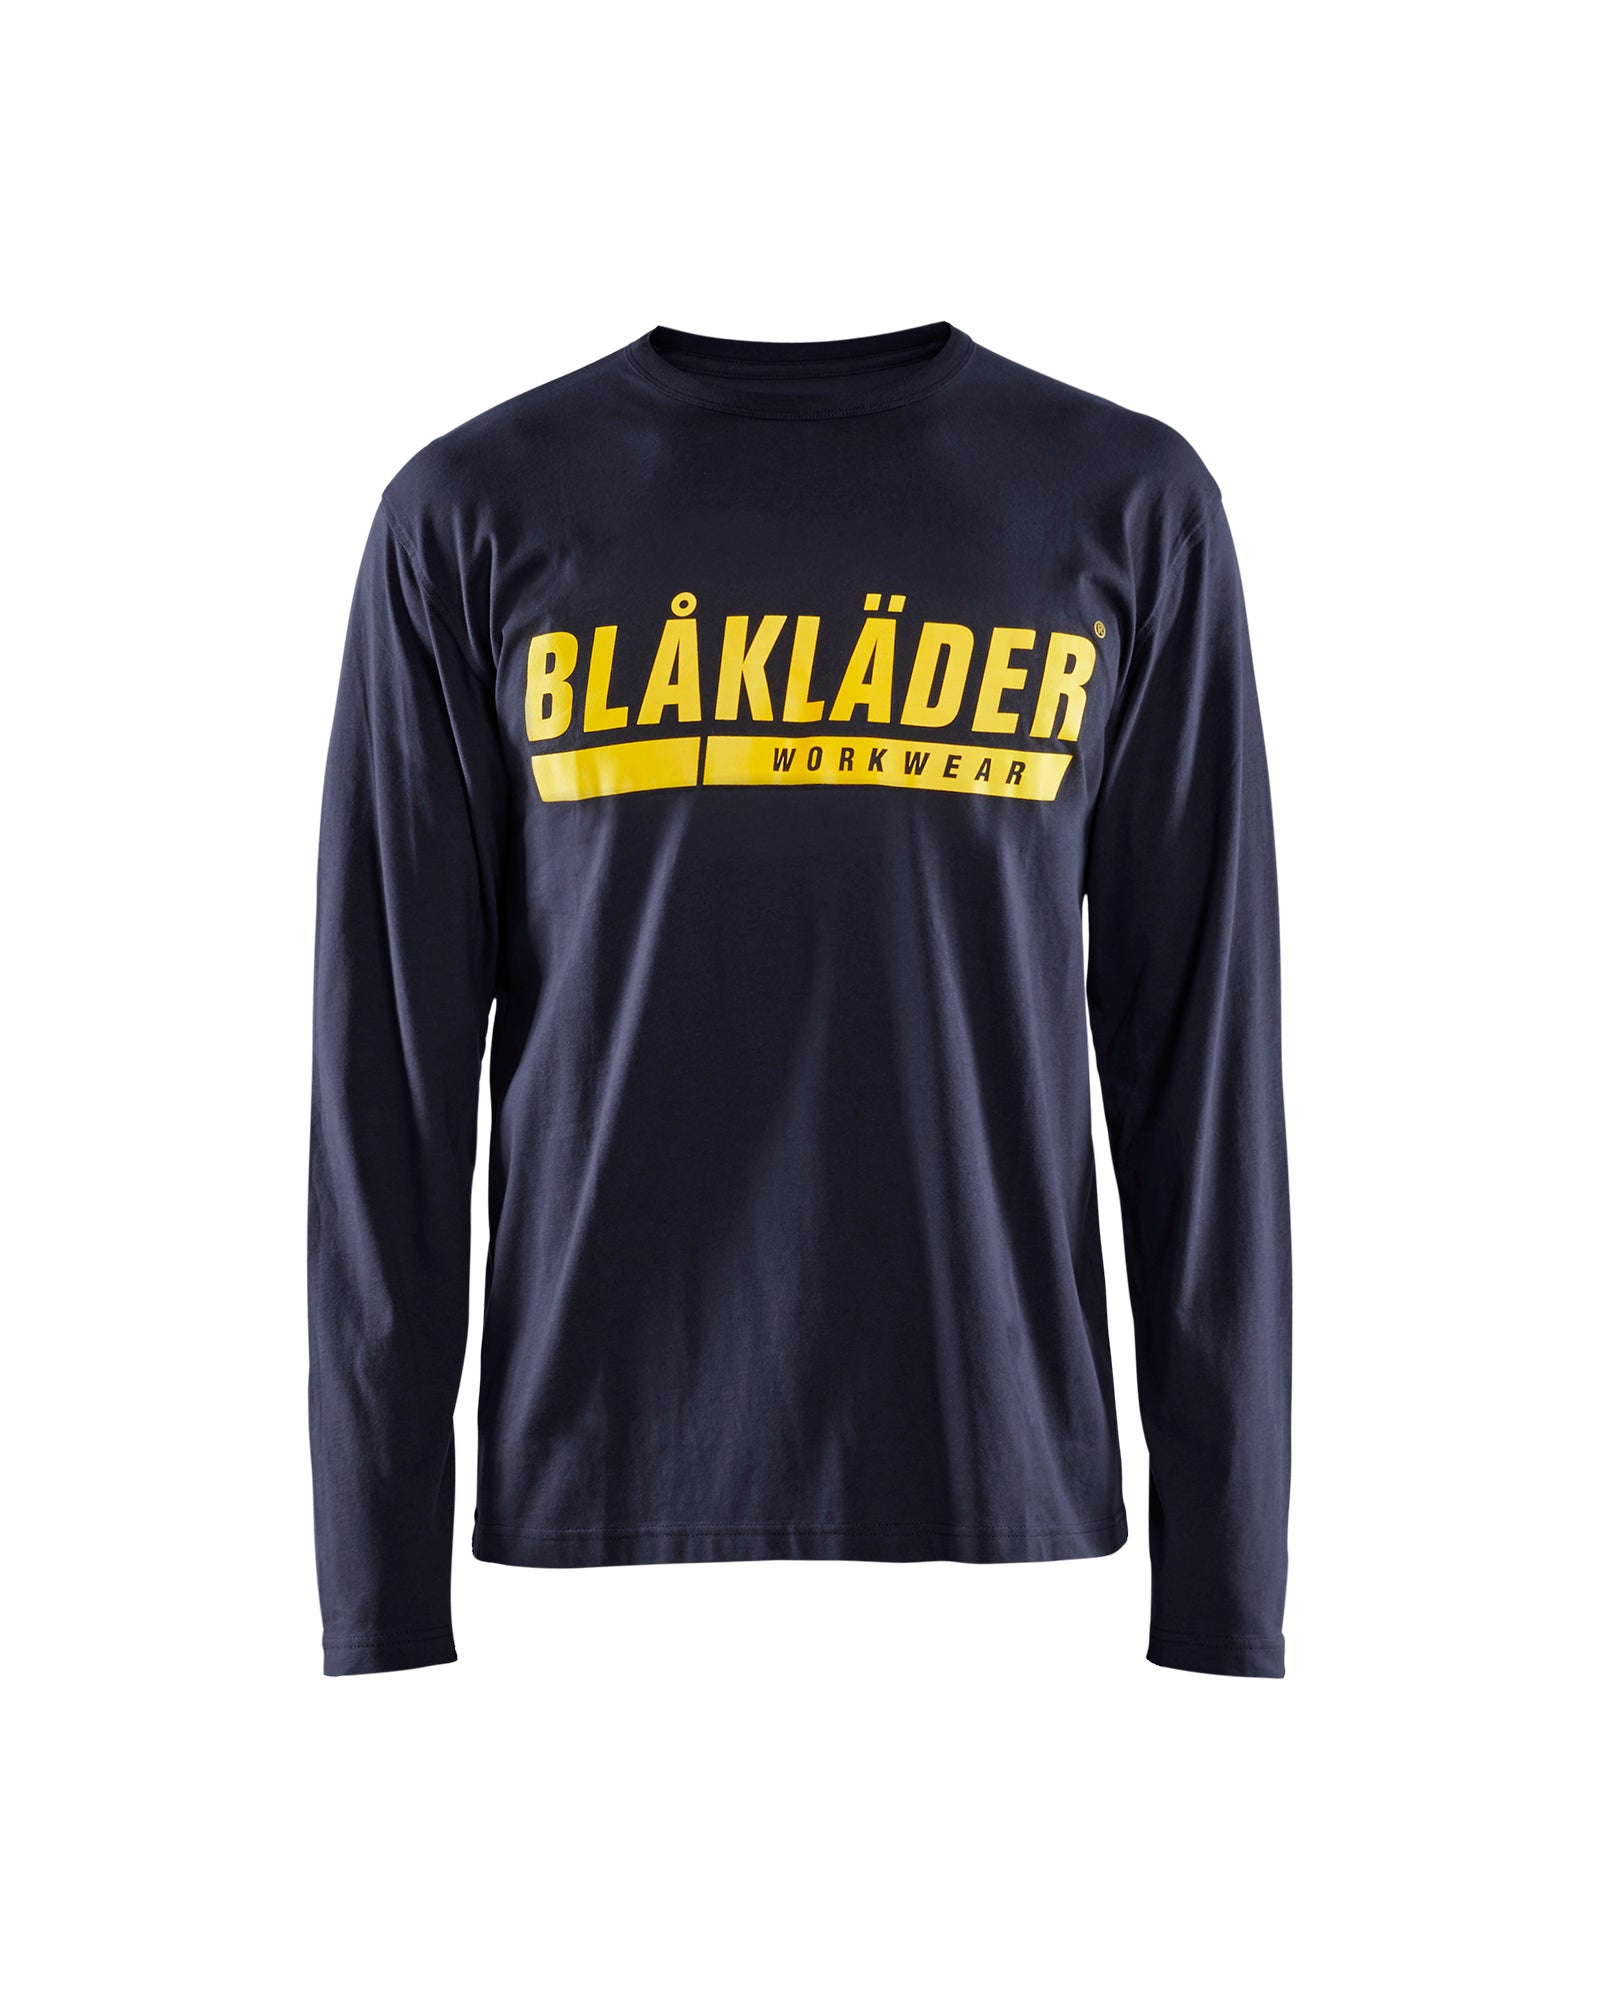 Men's Blaklader US Long Sleeves with Print T-Shirt in Navy Blue from the front view